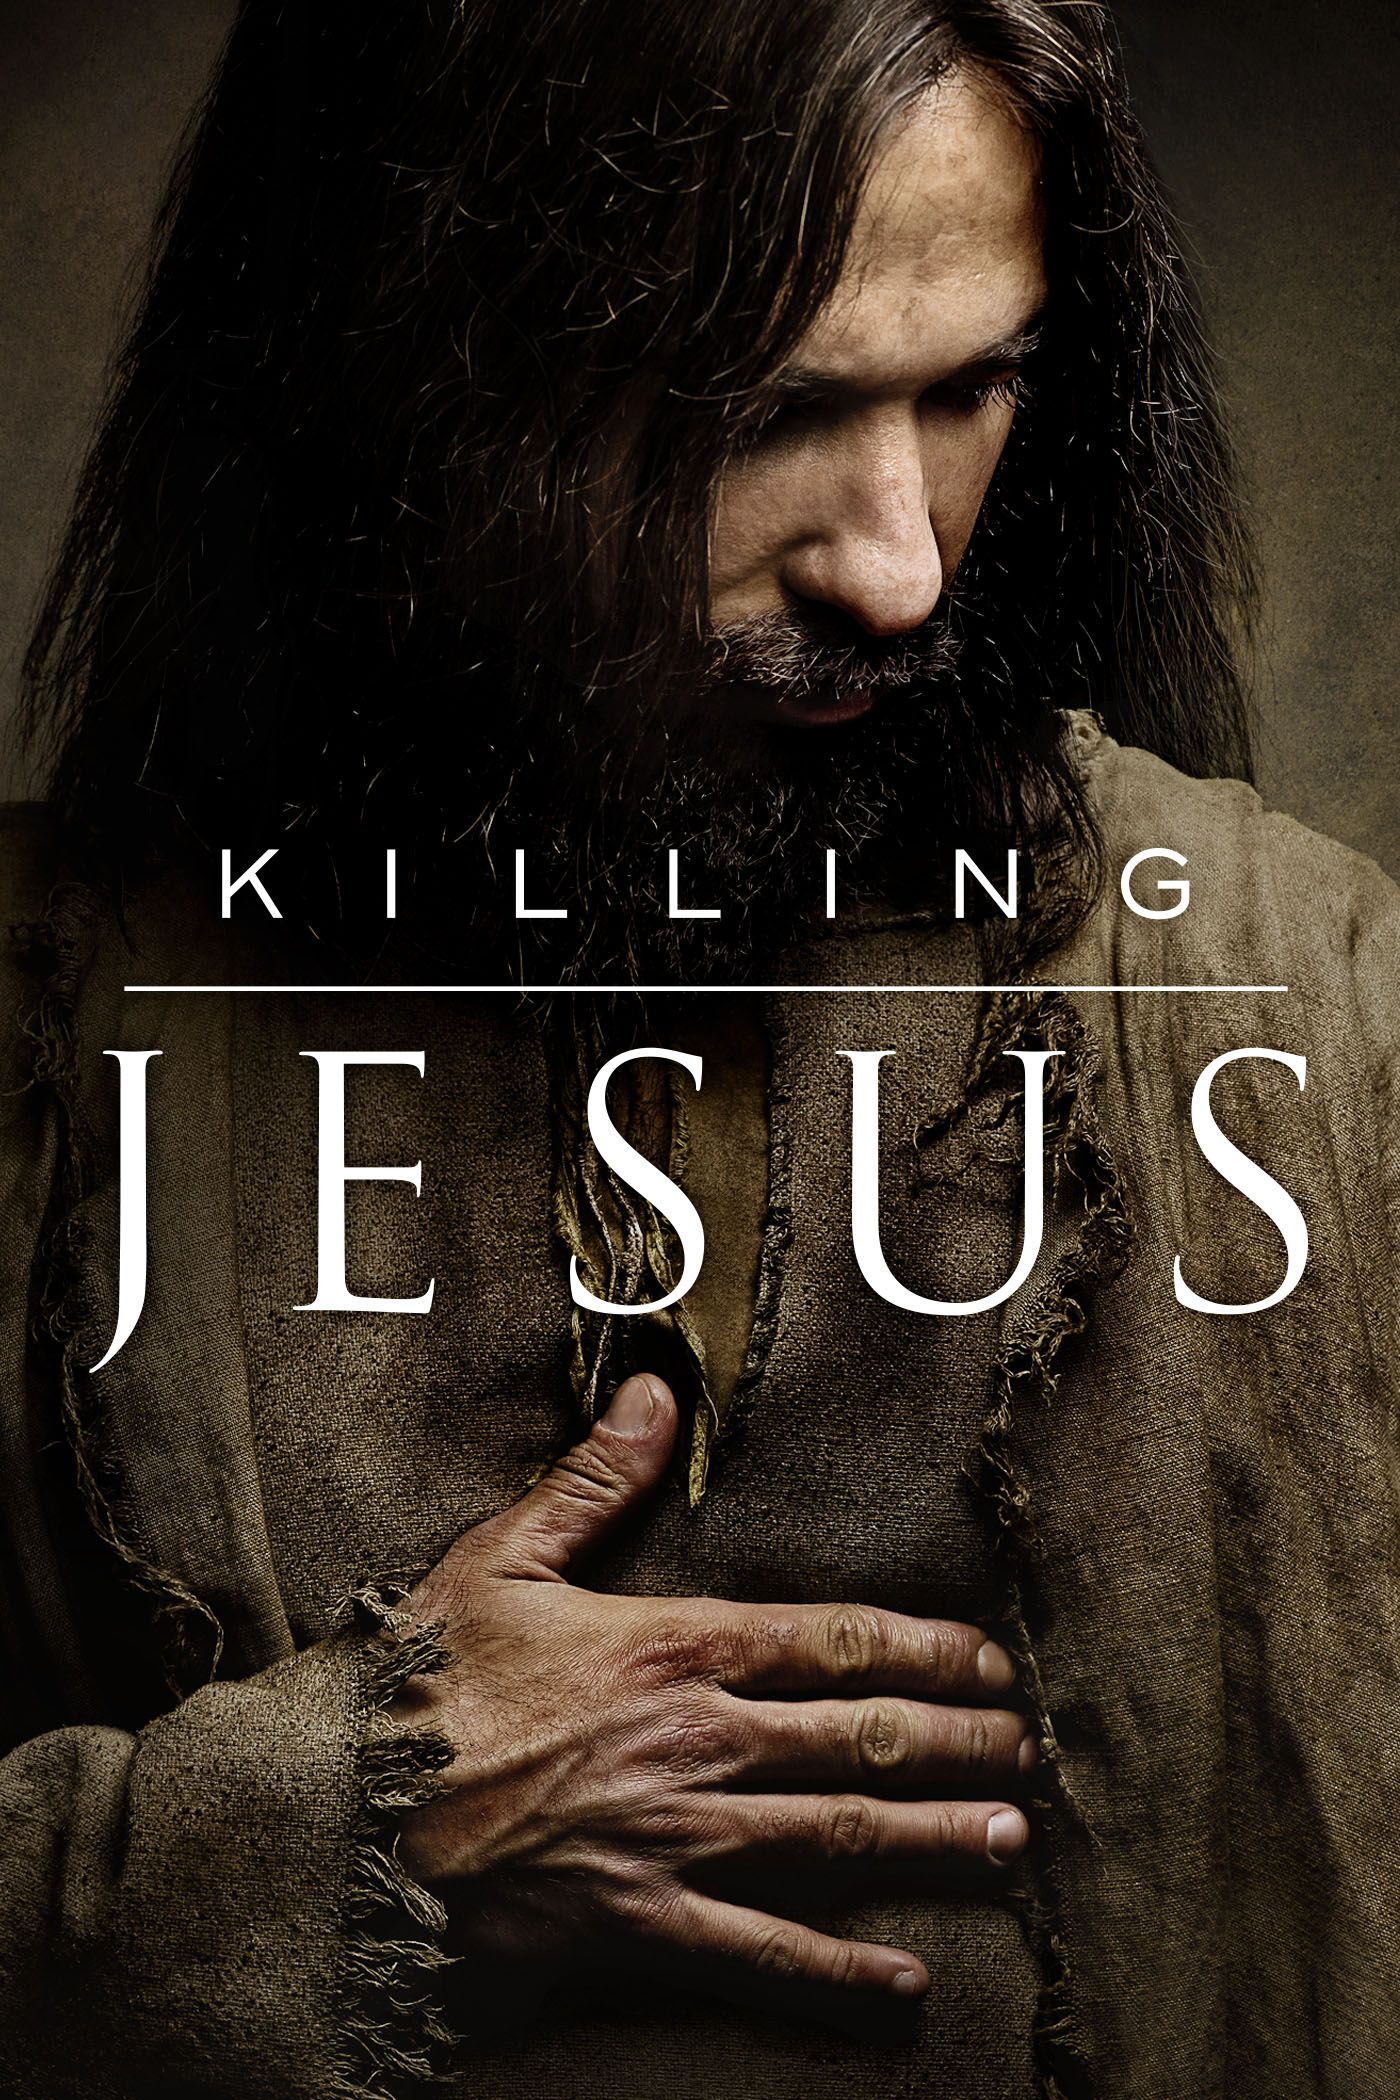 the passion of christ full movie in english language